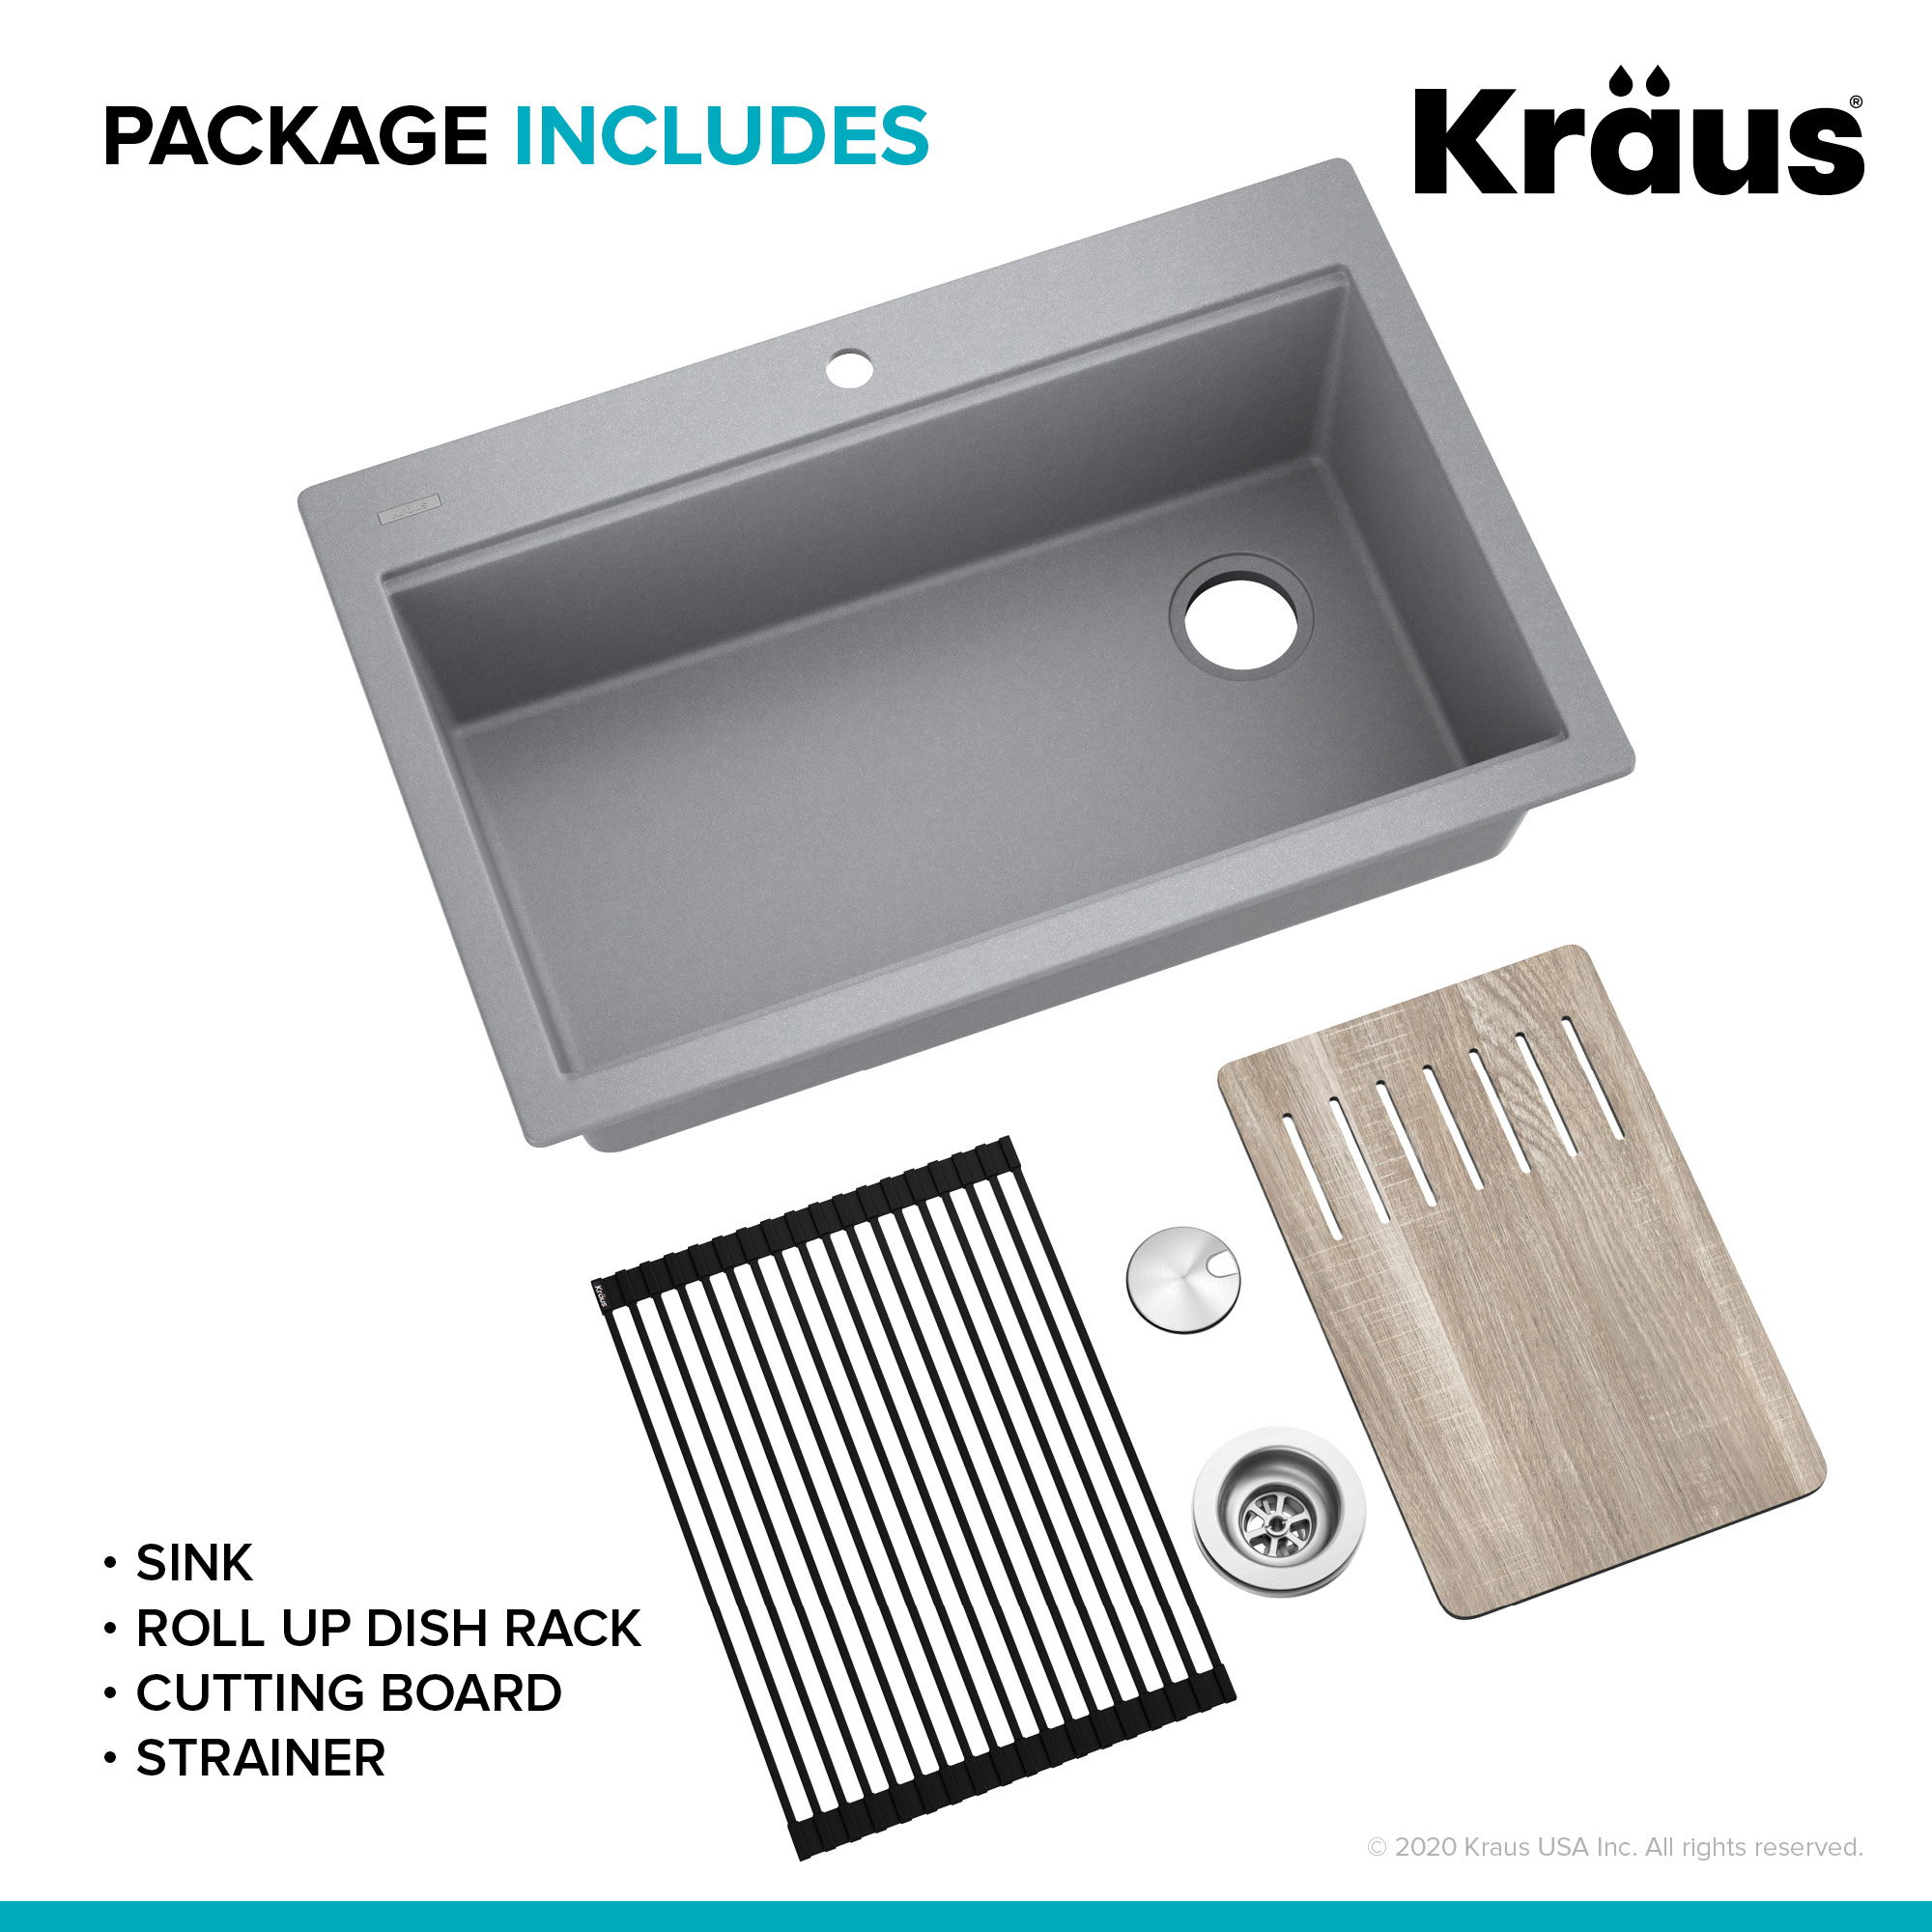 KRAUS Bellucci Workstation 33 inch Drop-In Granite Composite Single Bowl Kitchen Sink in Metallic Gray with Accessories - image 5 of 14